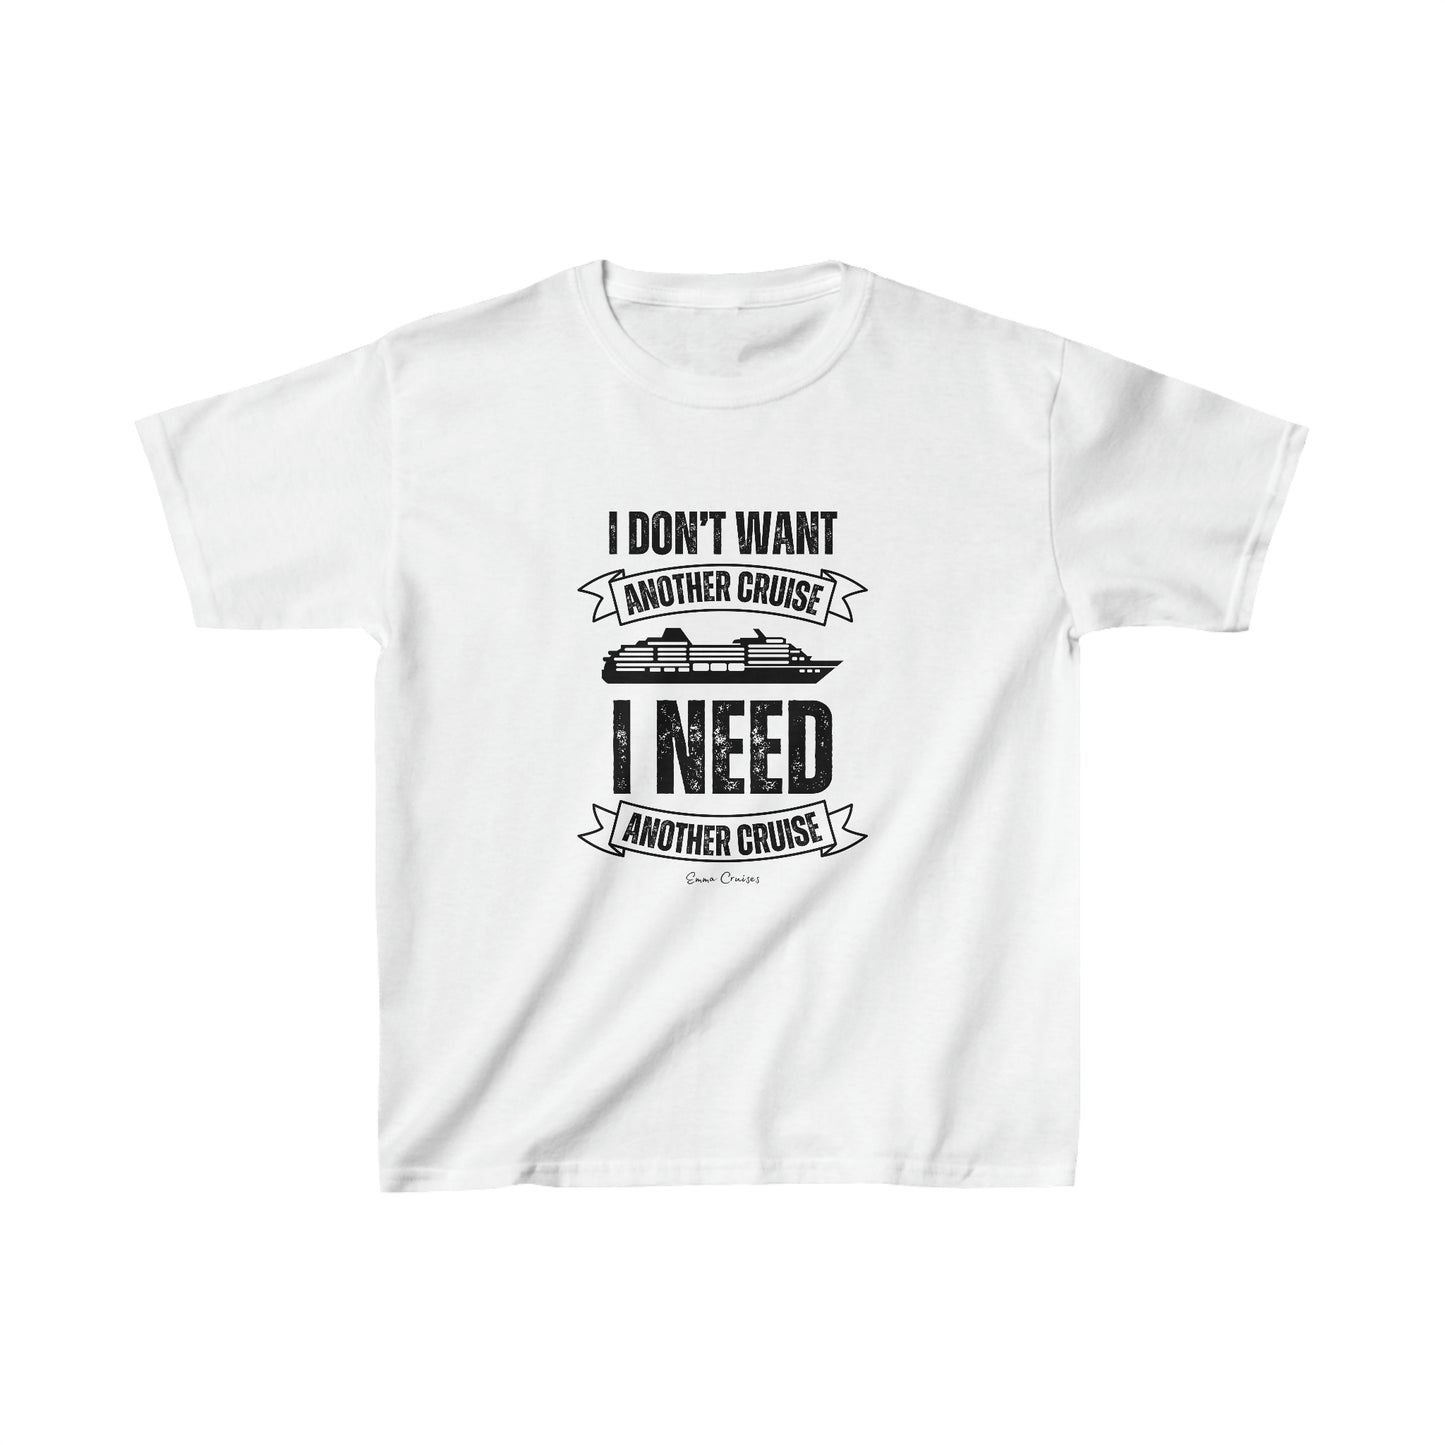 I Don't Want Another Cruise - Kids UNISEX T-Shirt